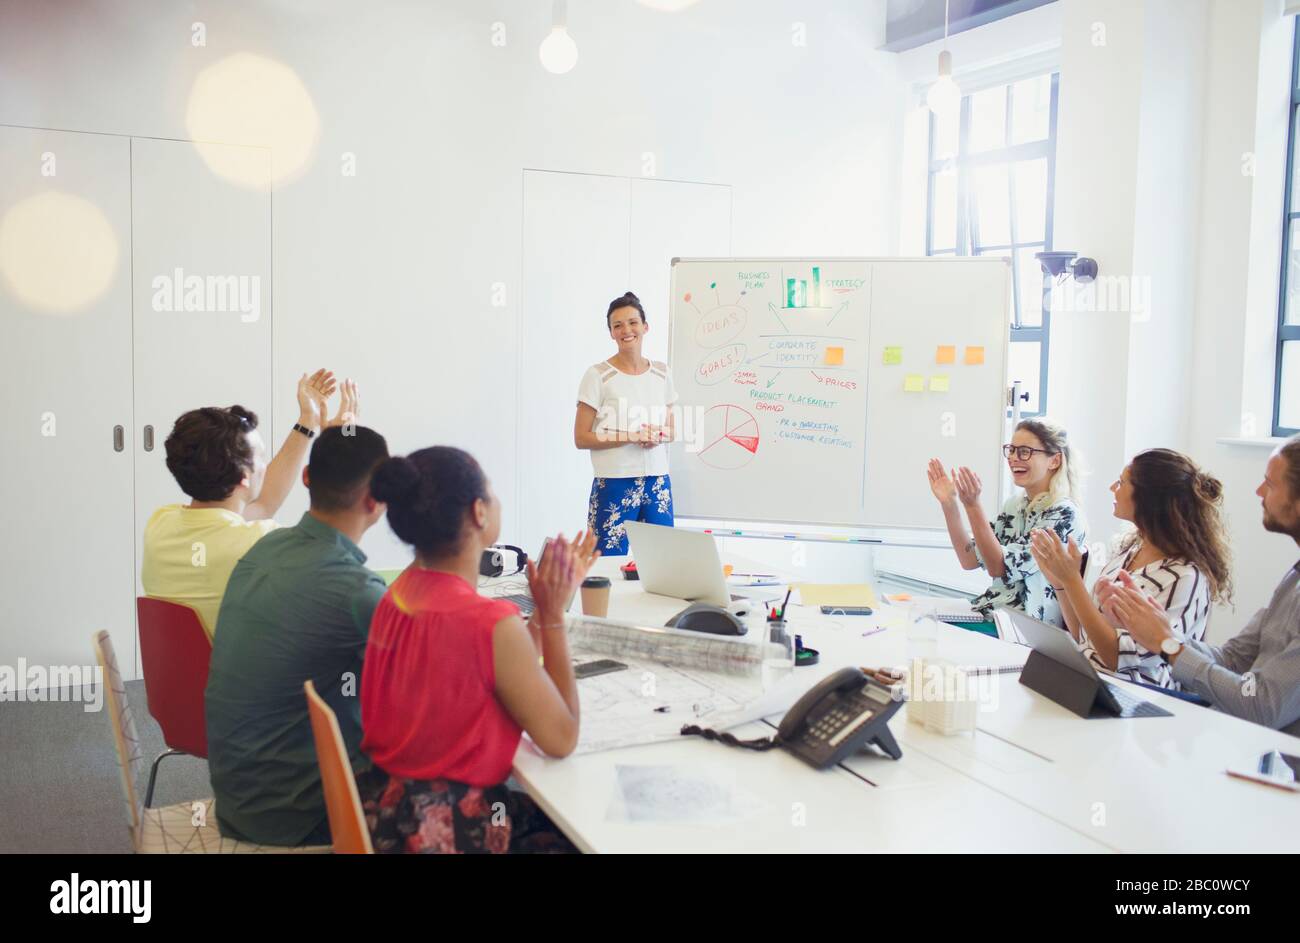 Supportive colleagues clapping for female architect leading meeting at whiteboard Stock Photo